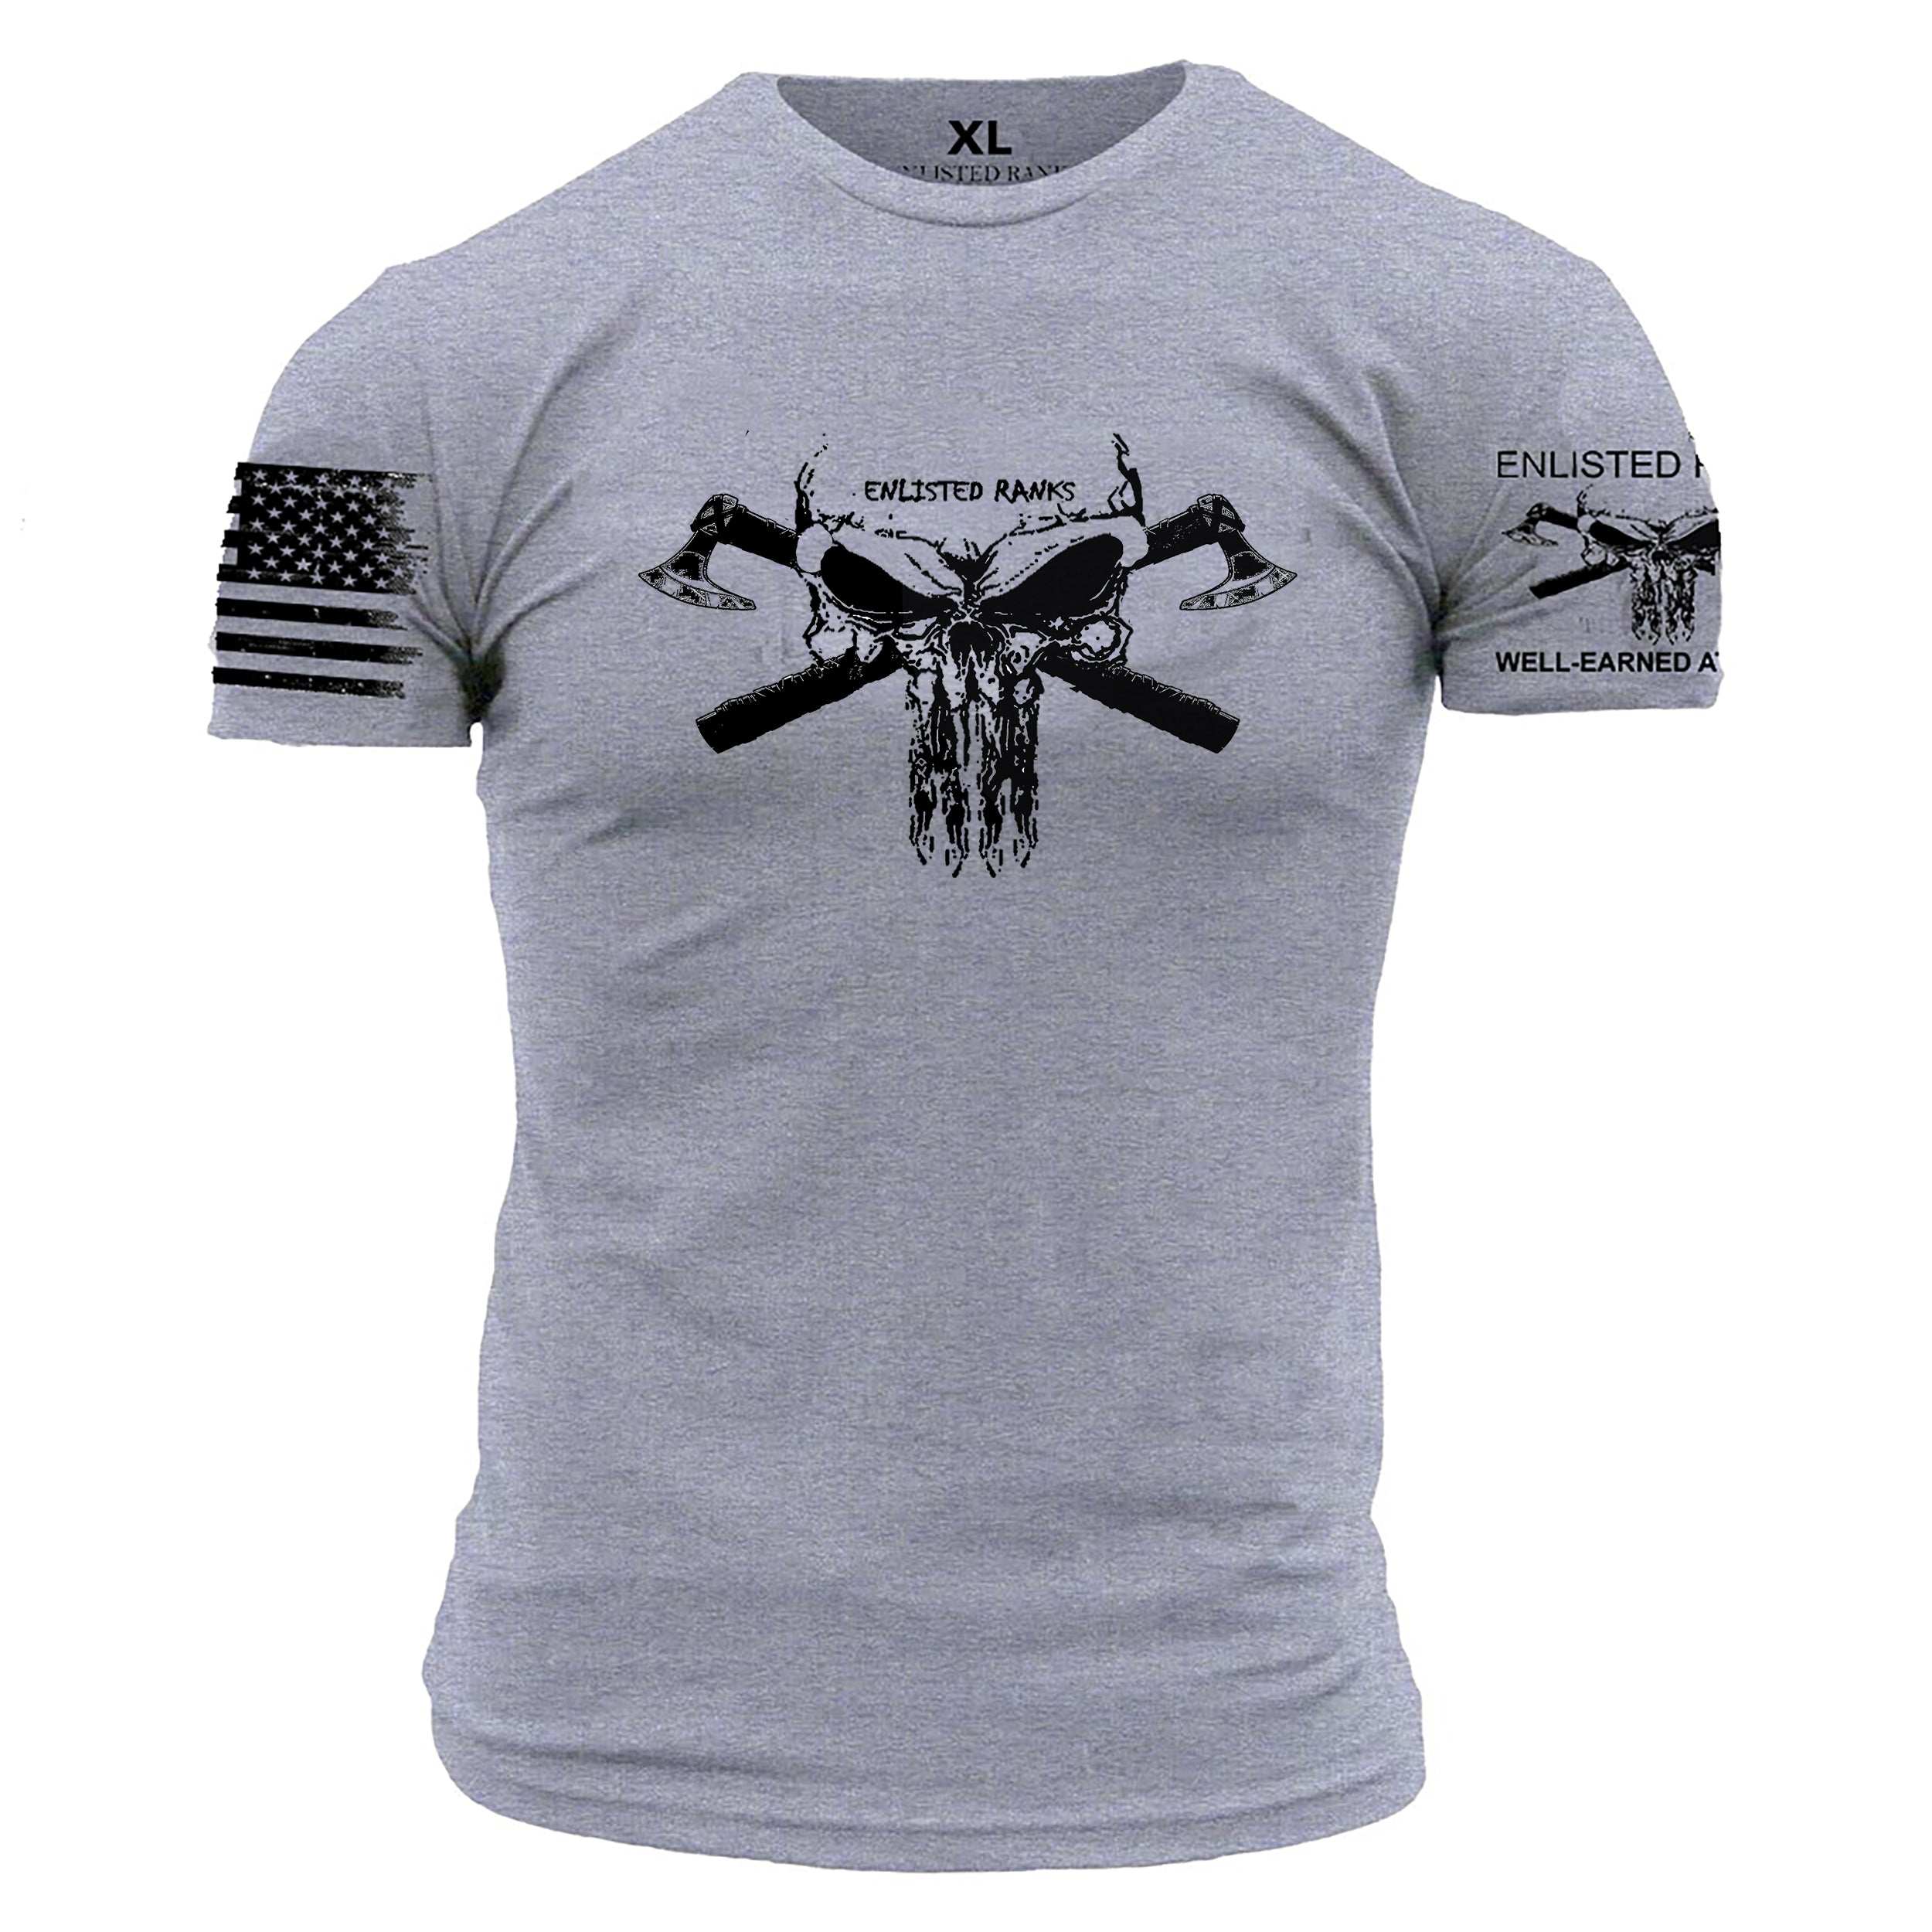 BATTLE TESTED, FRONT PRINT – Enlisted Ranks